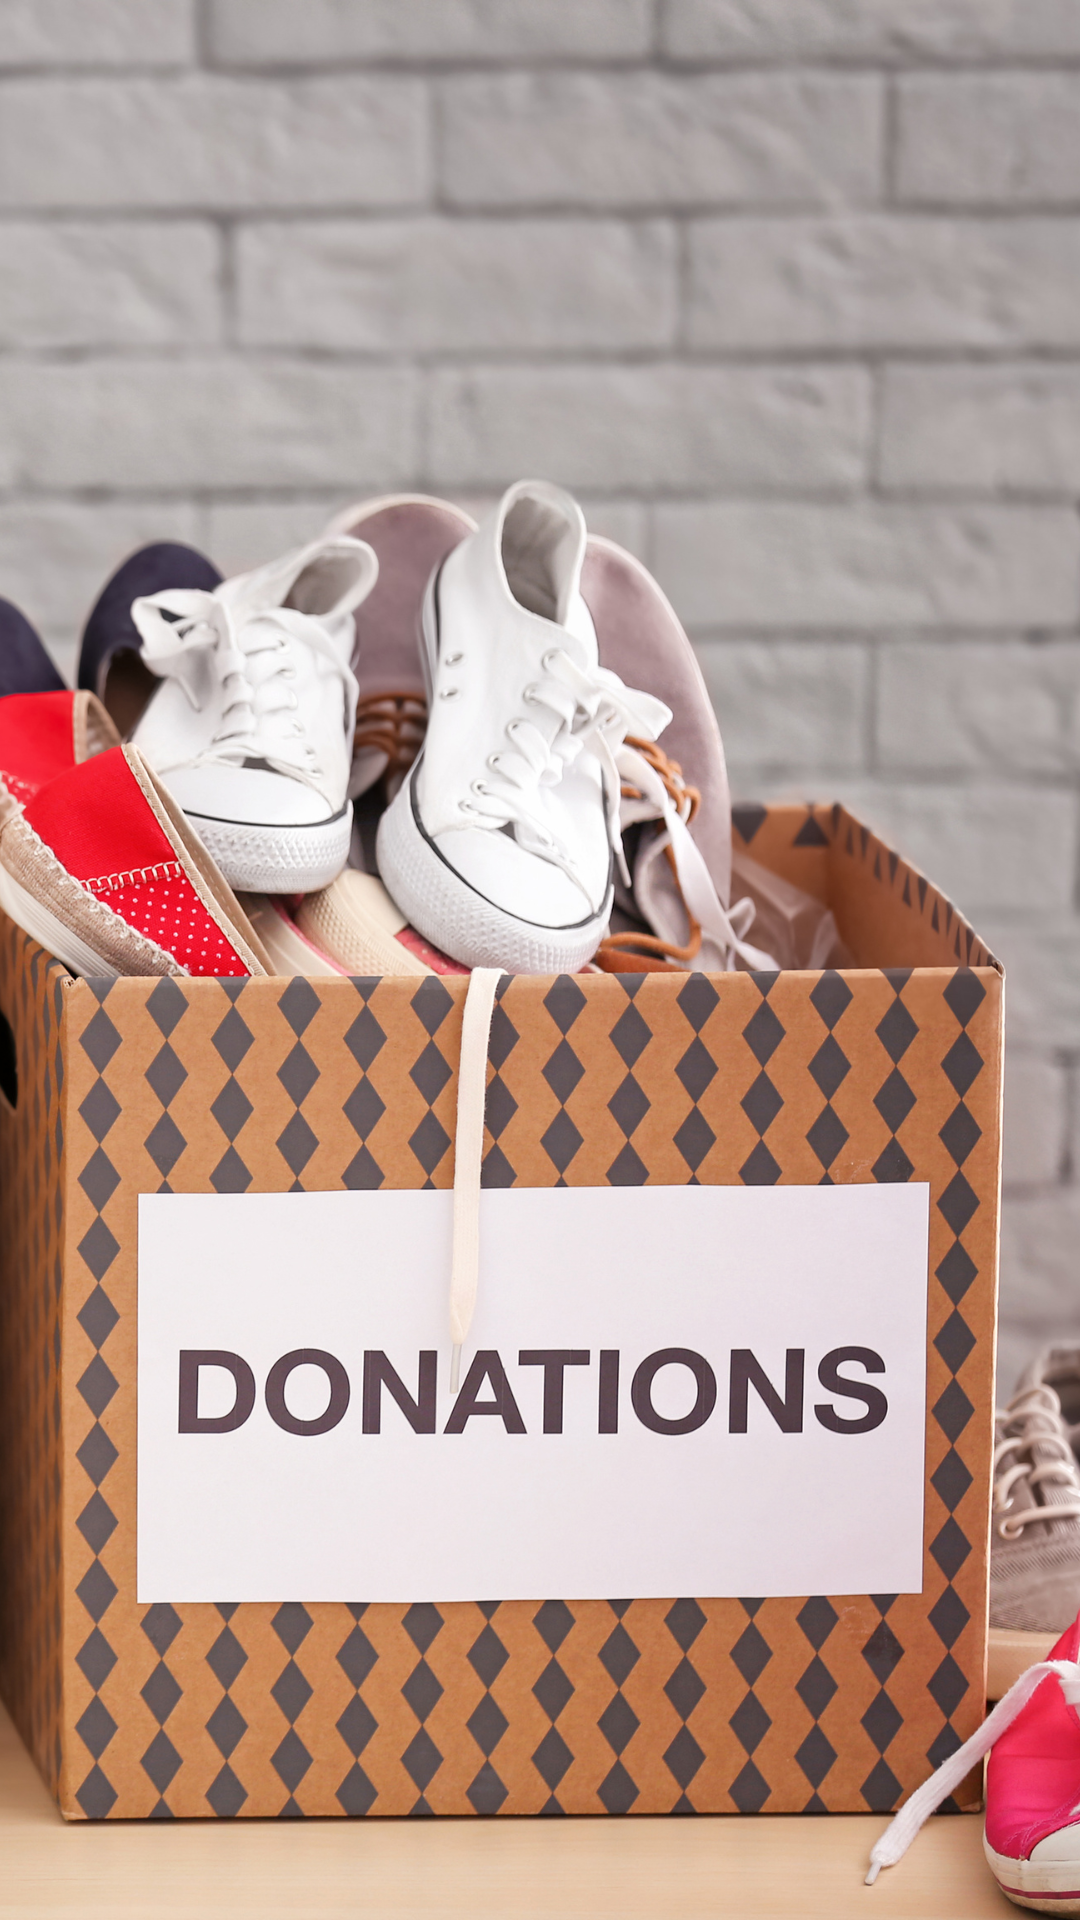 Image of shoes in a box that says "donations"